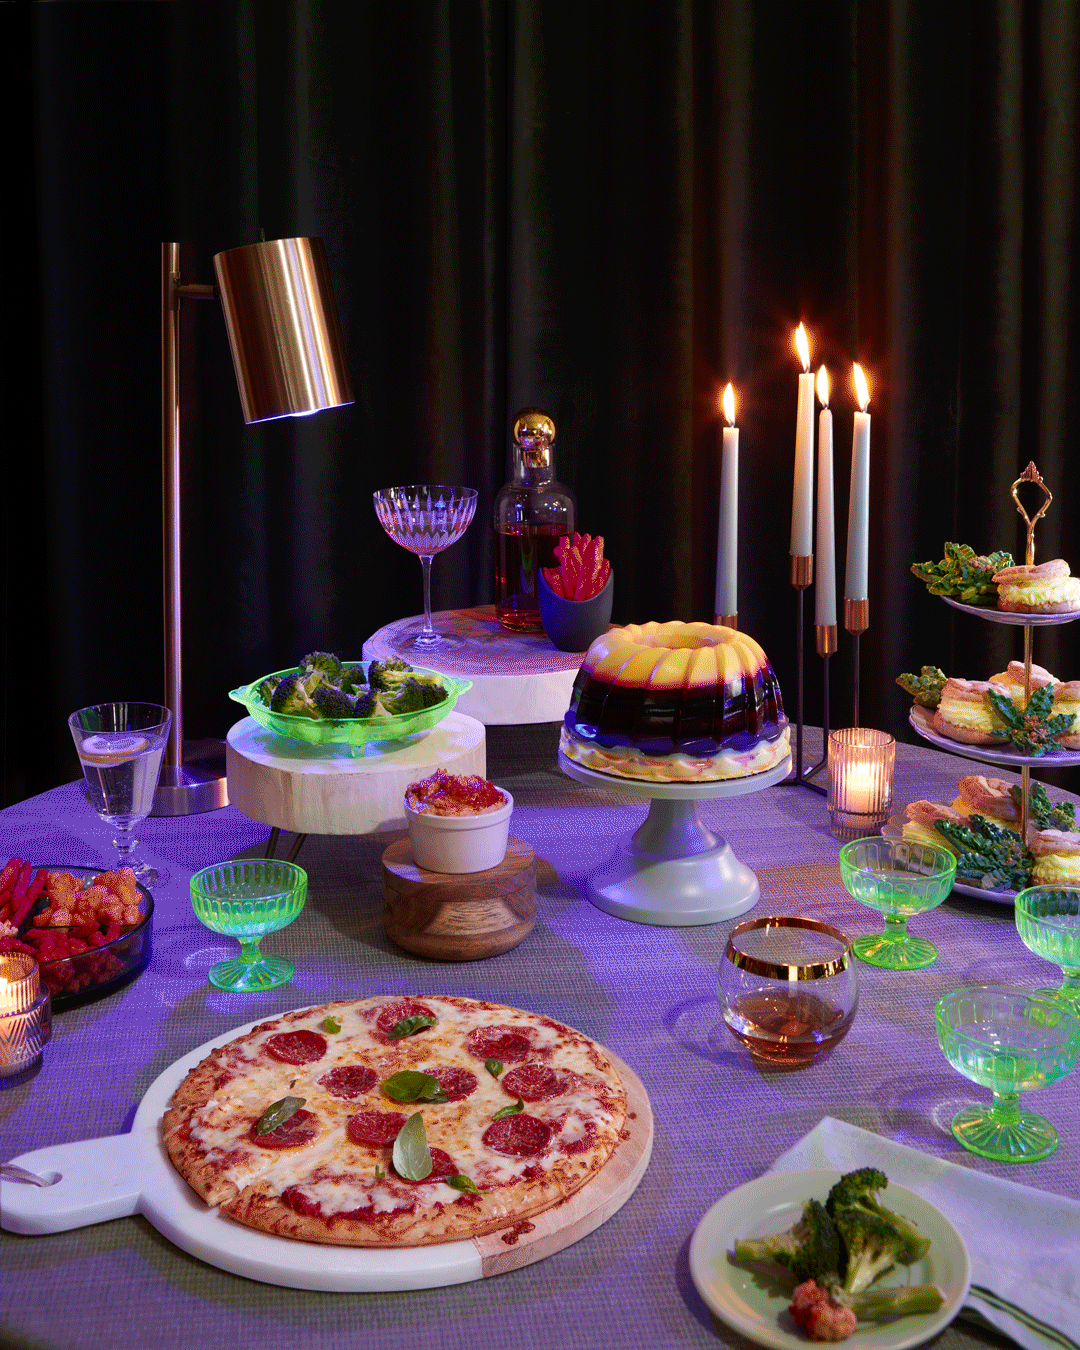 Conceptual-Food-Photographer-Lisa-Predko-420-Friends-Dining-Table